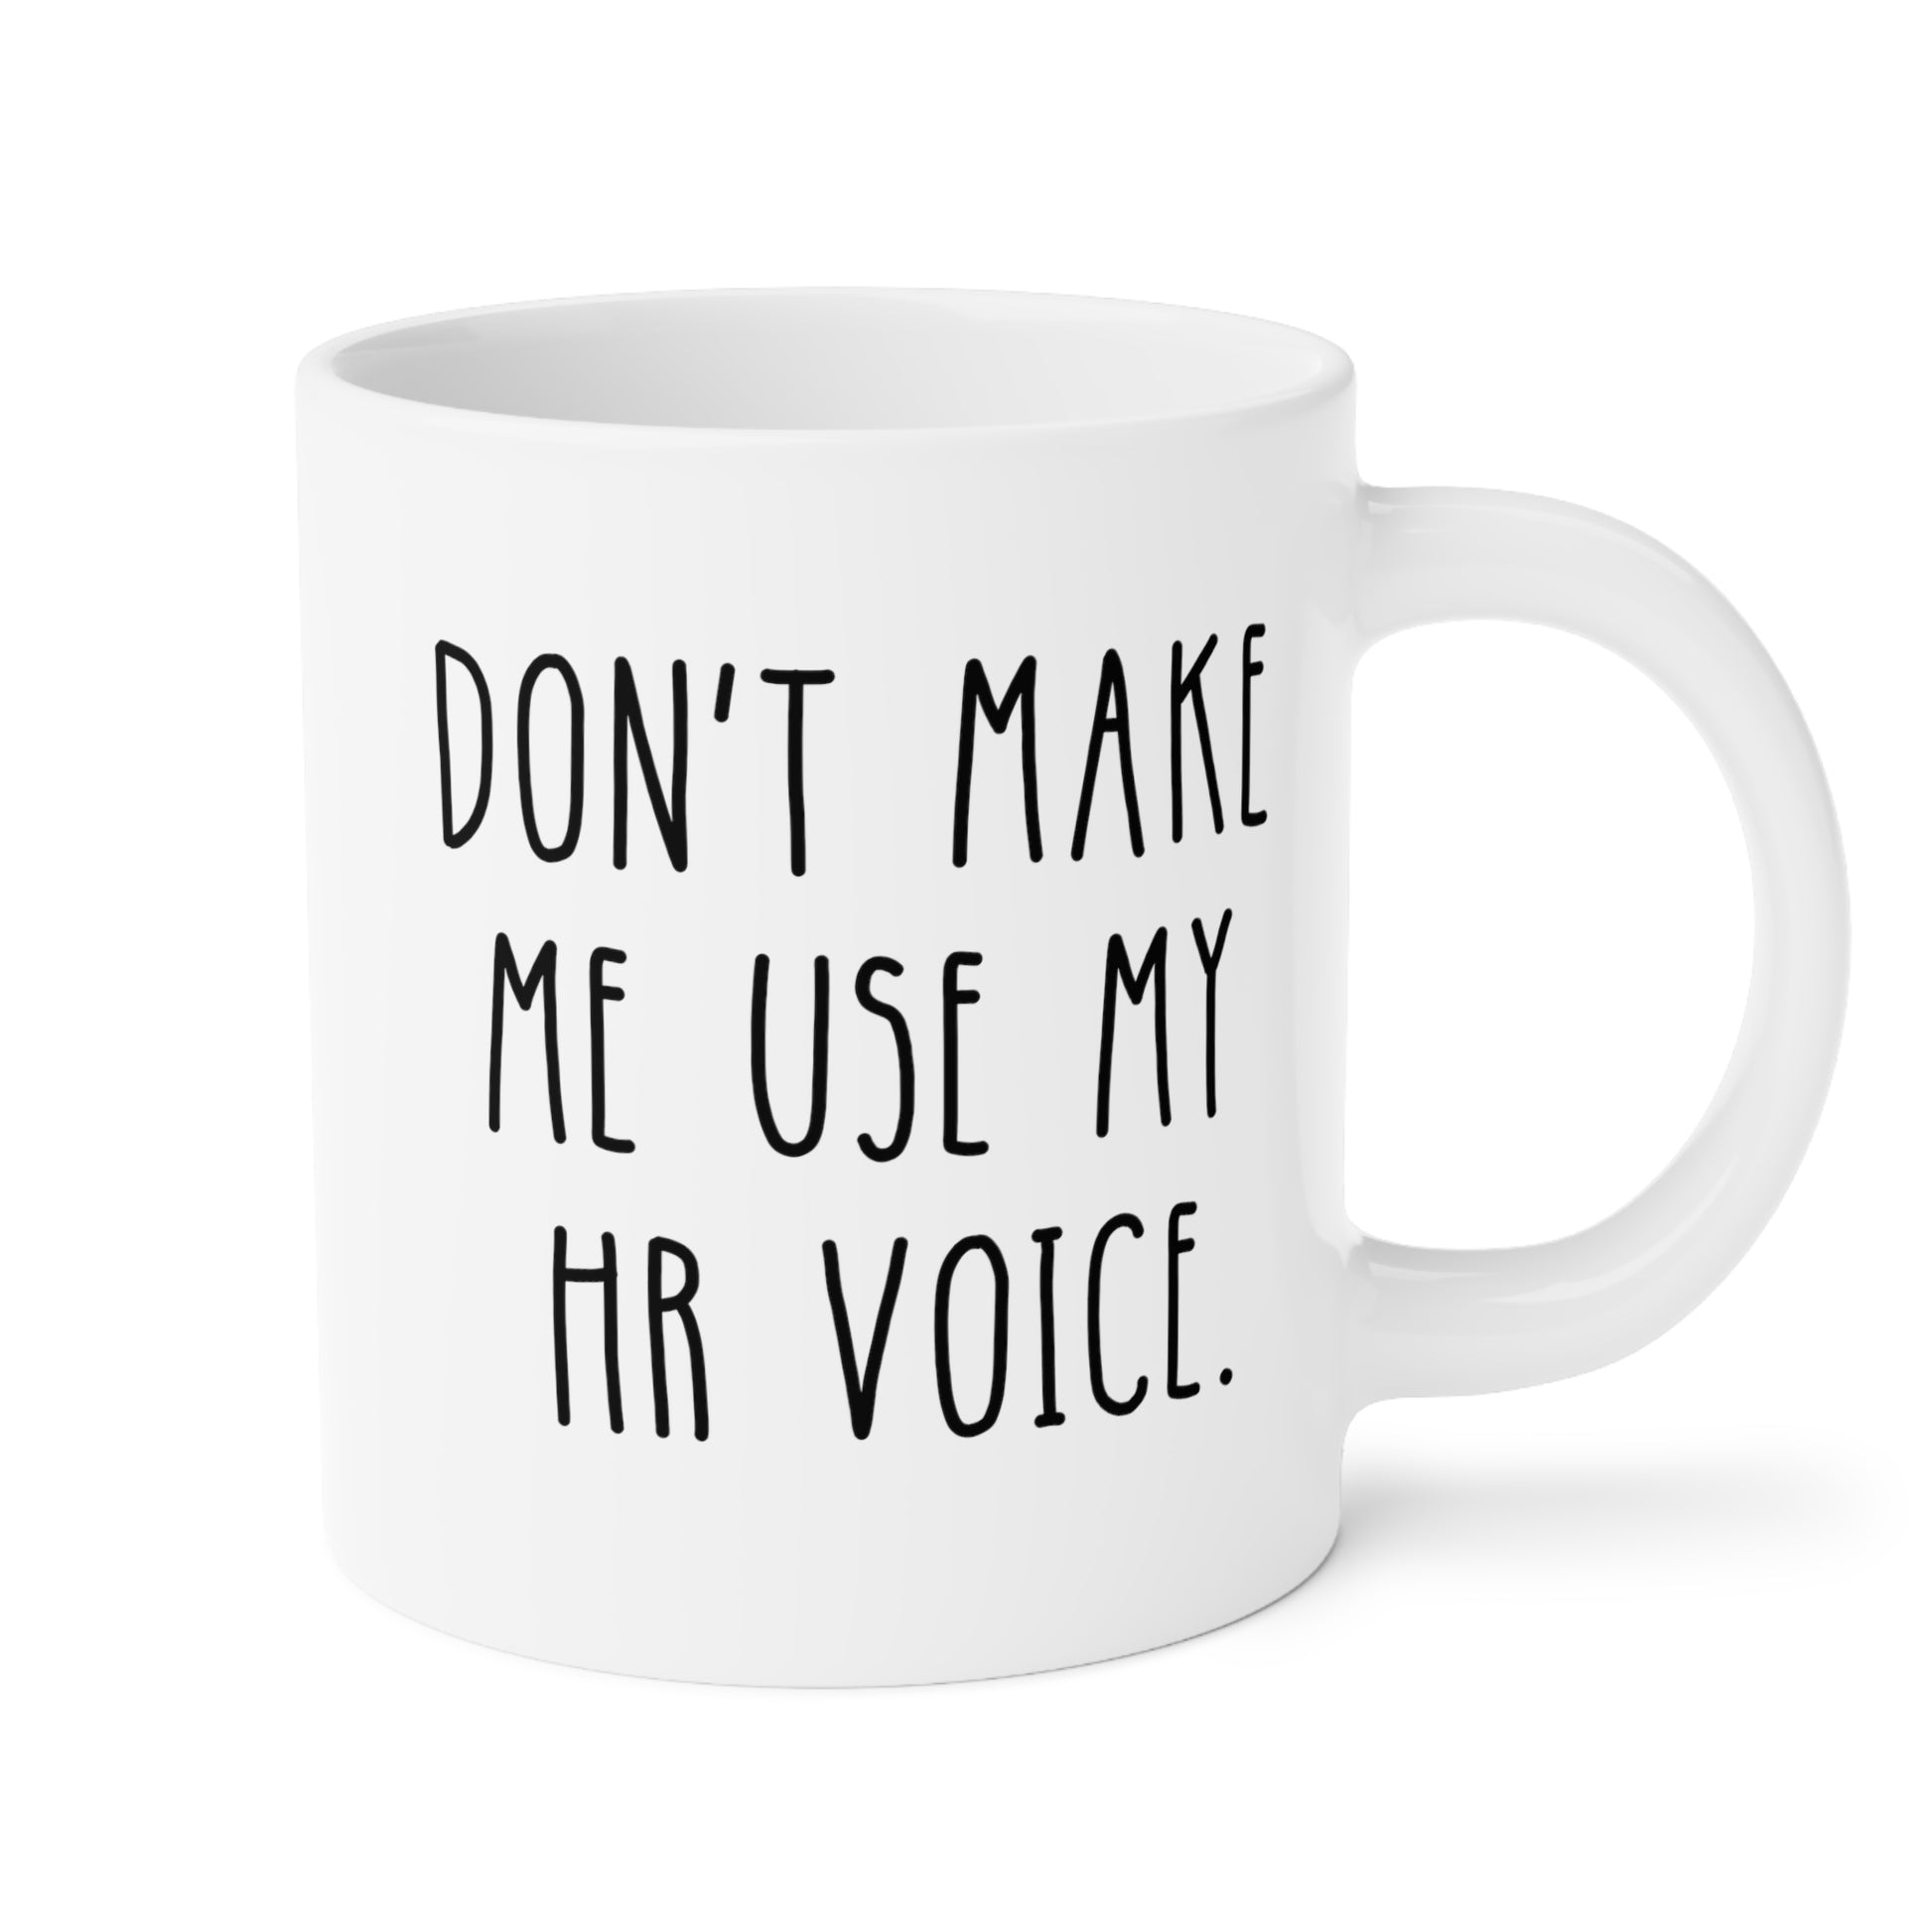 Don't Make Me Use My HR Voice 20oz white funny large coffee mug gift for human resources coworker signs decor quotes waveywares wavey wares wavywares wavy wares